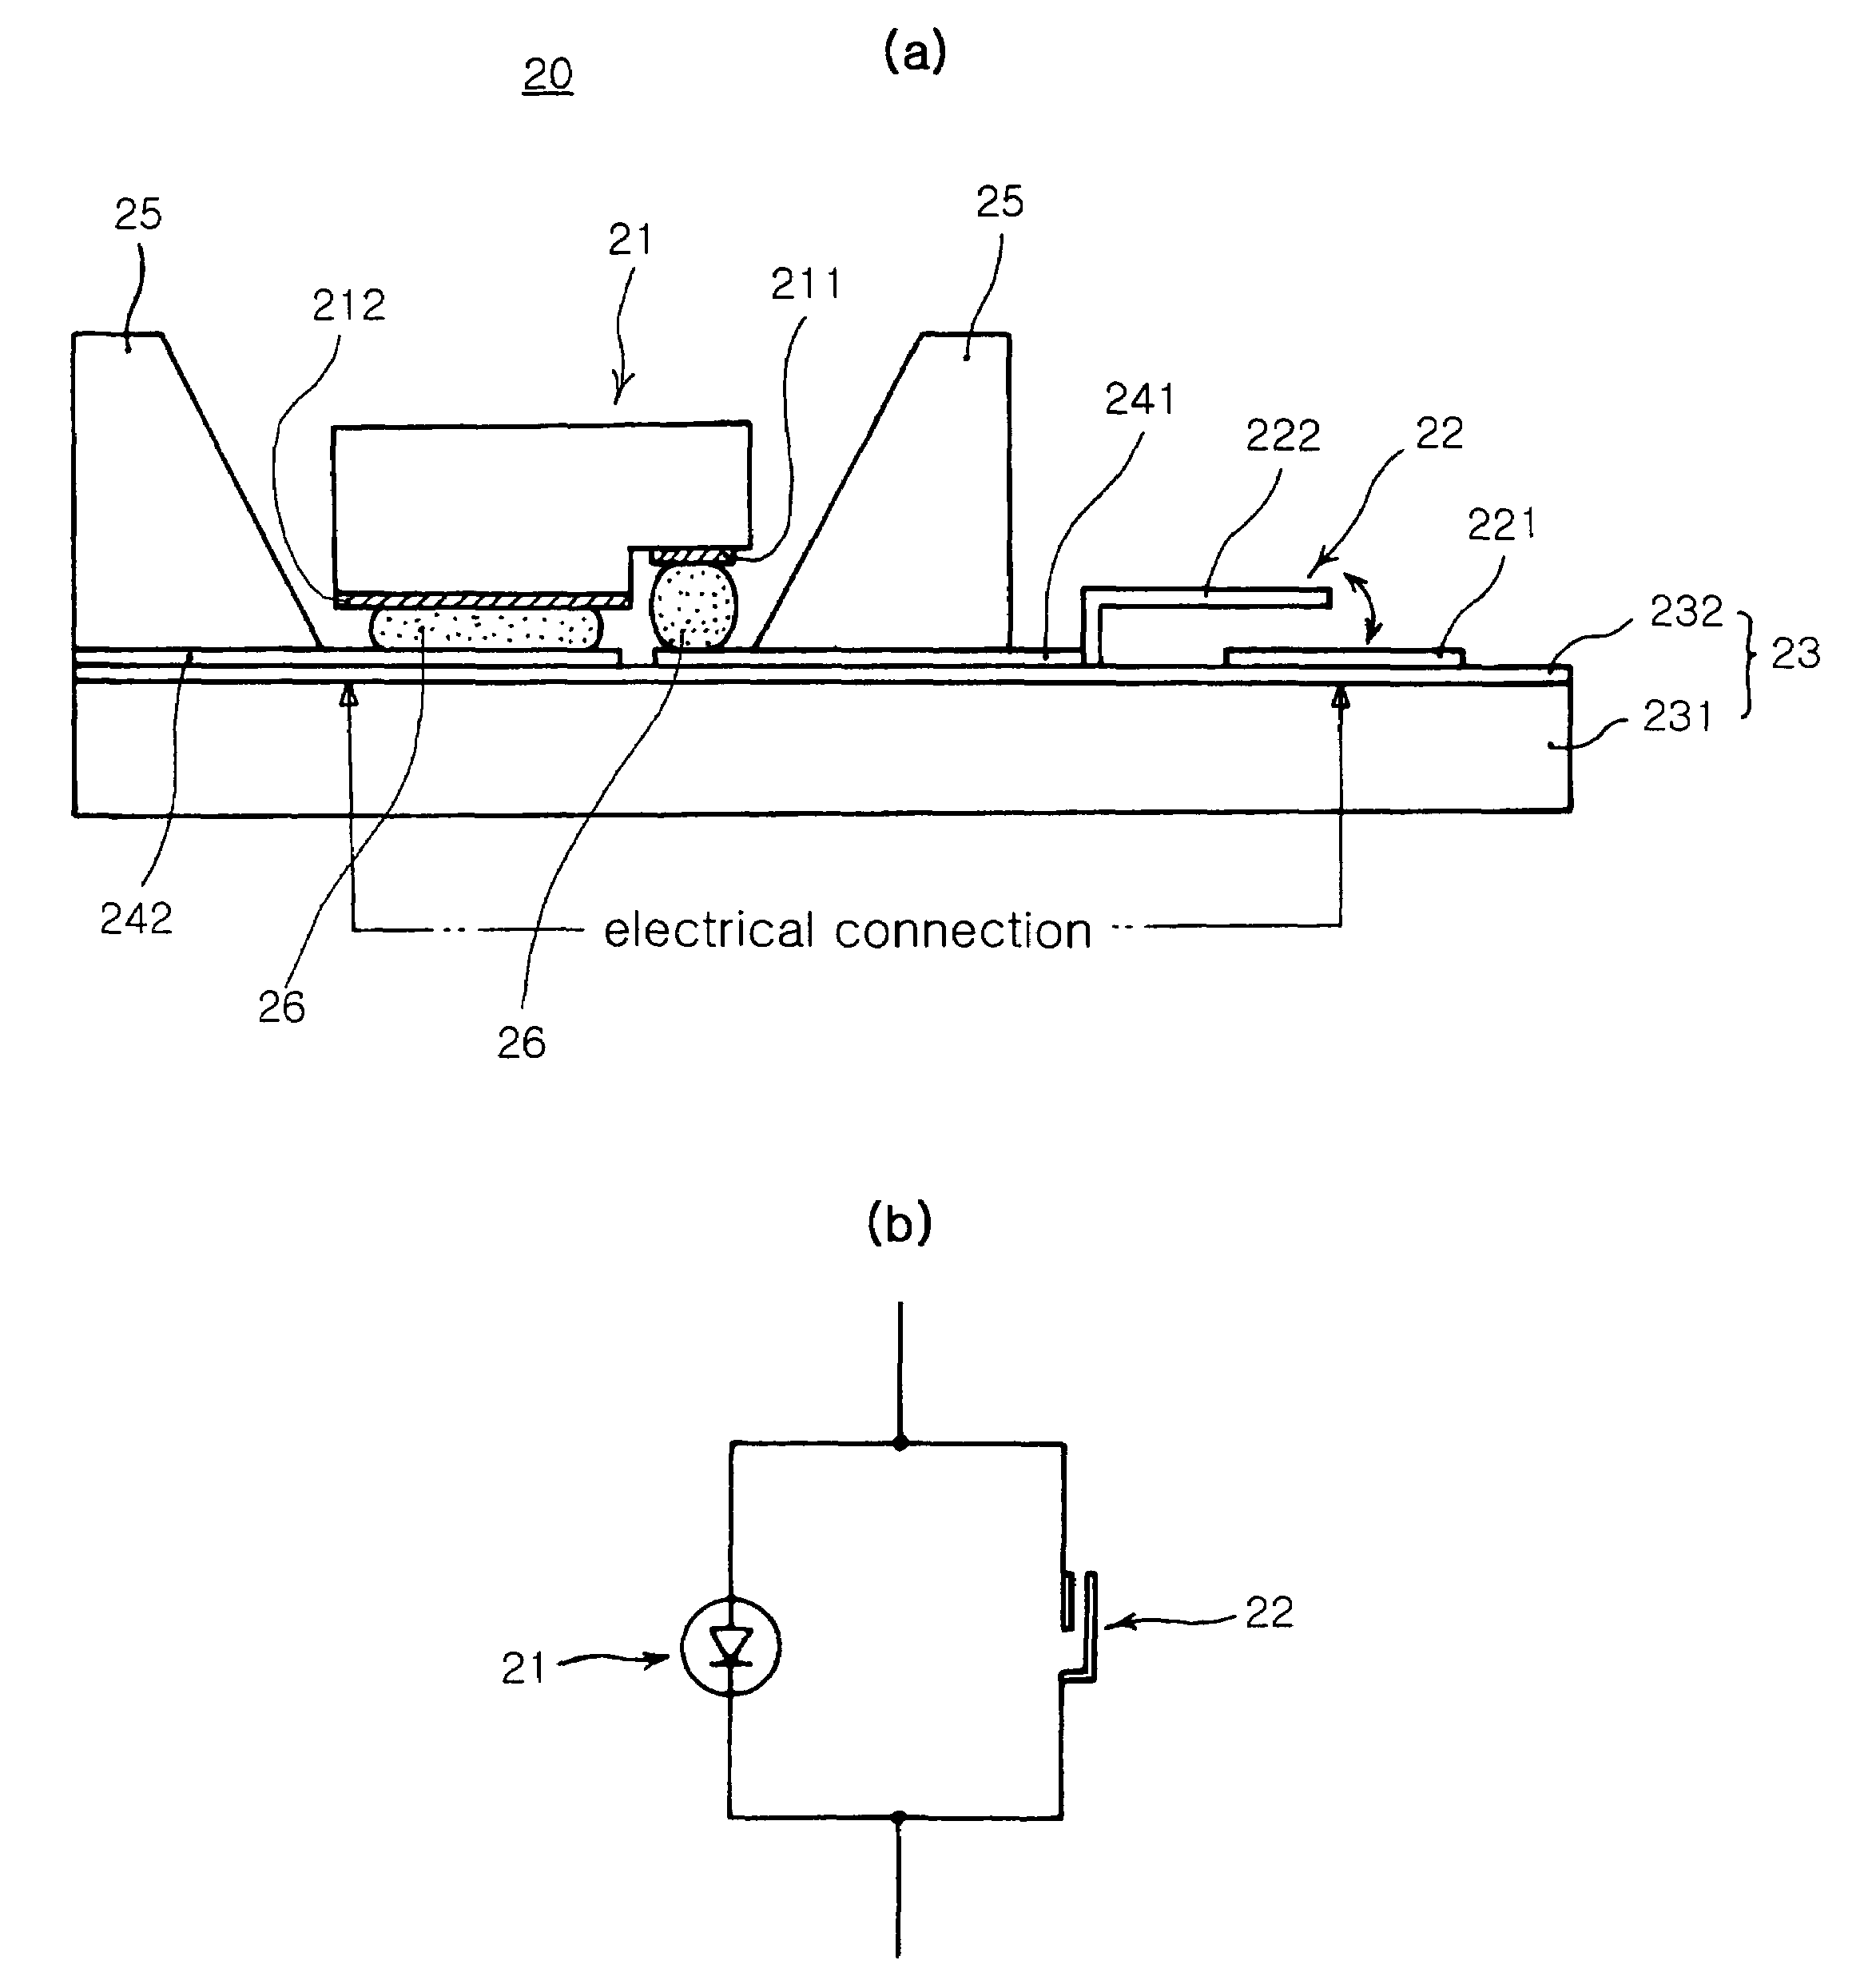 Light emitting diode package with protective function against electrostatic discharge